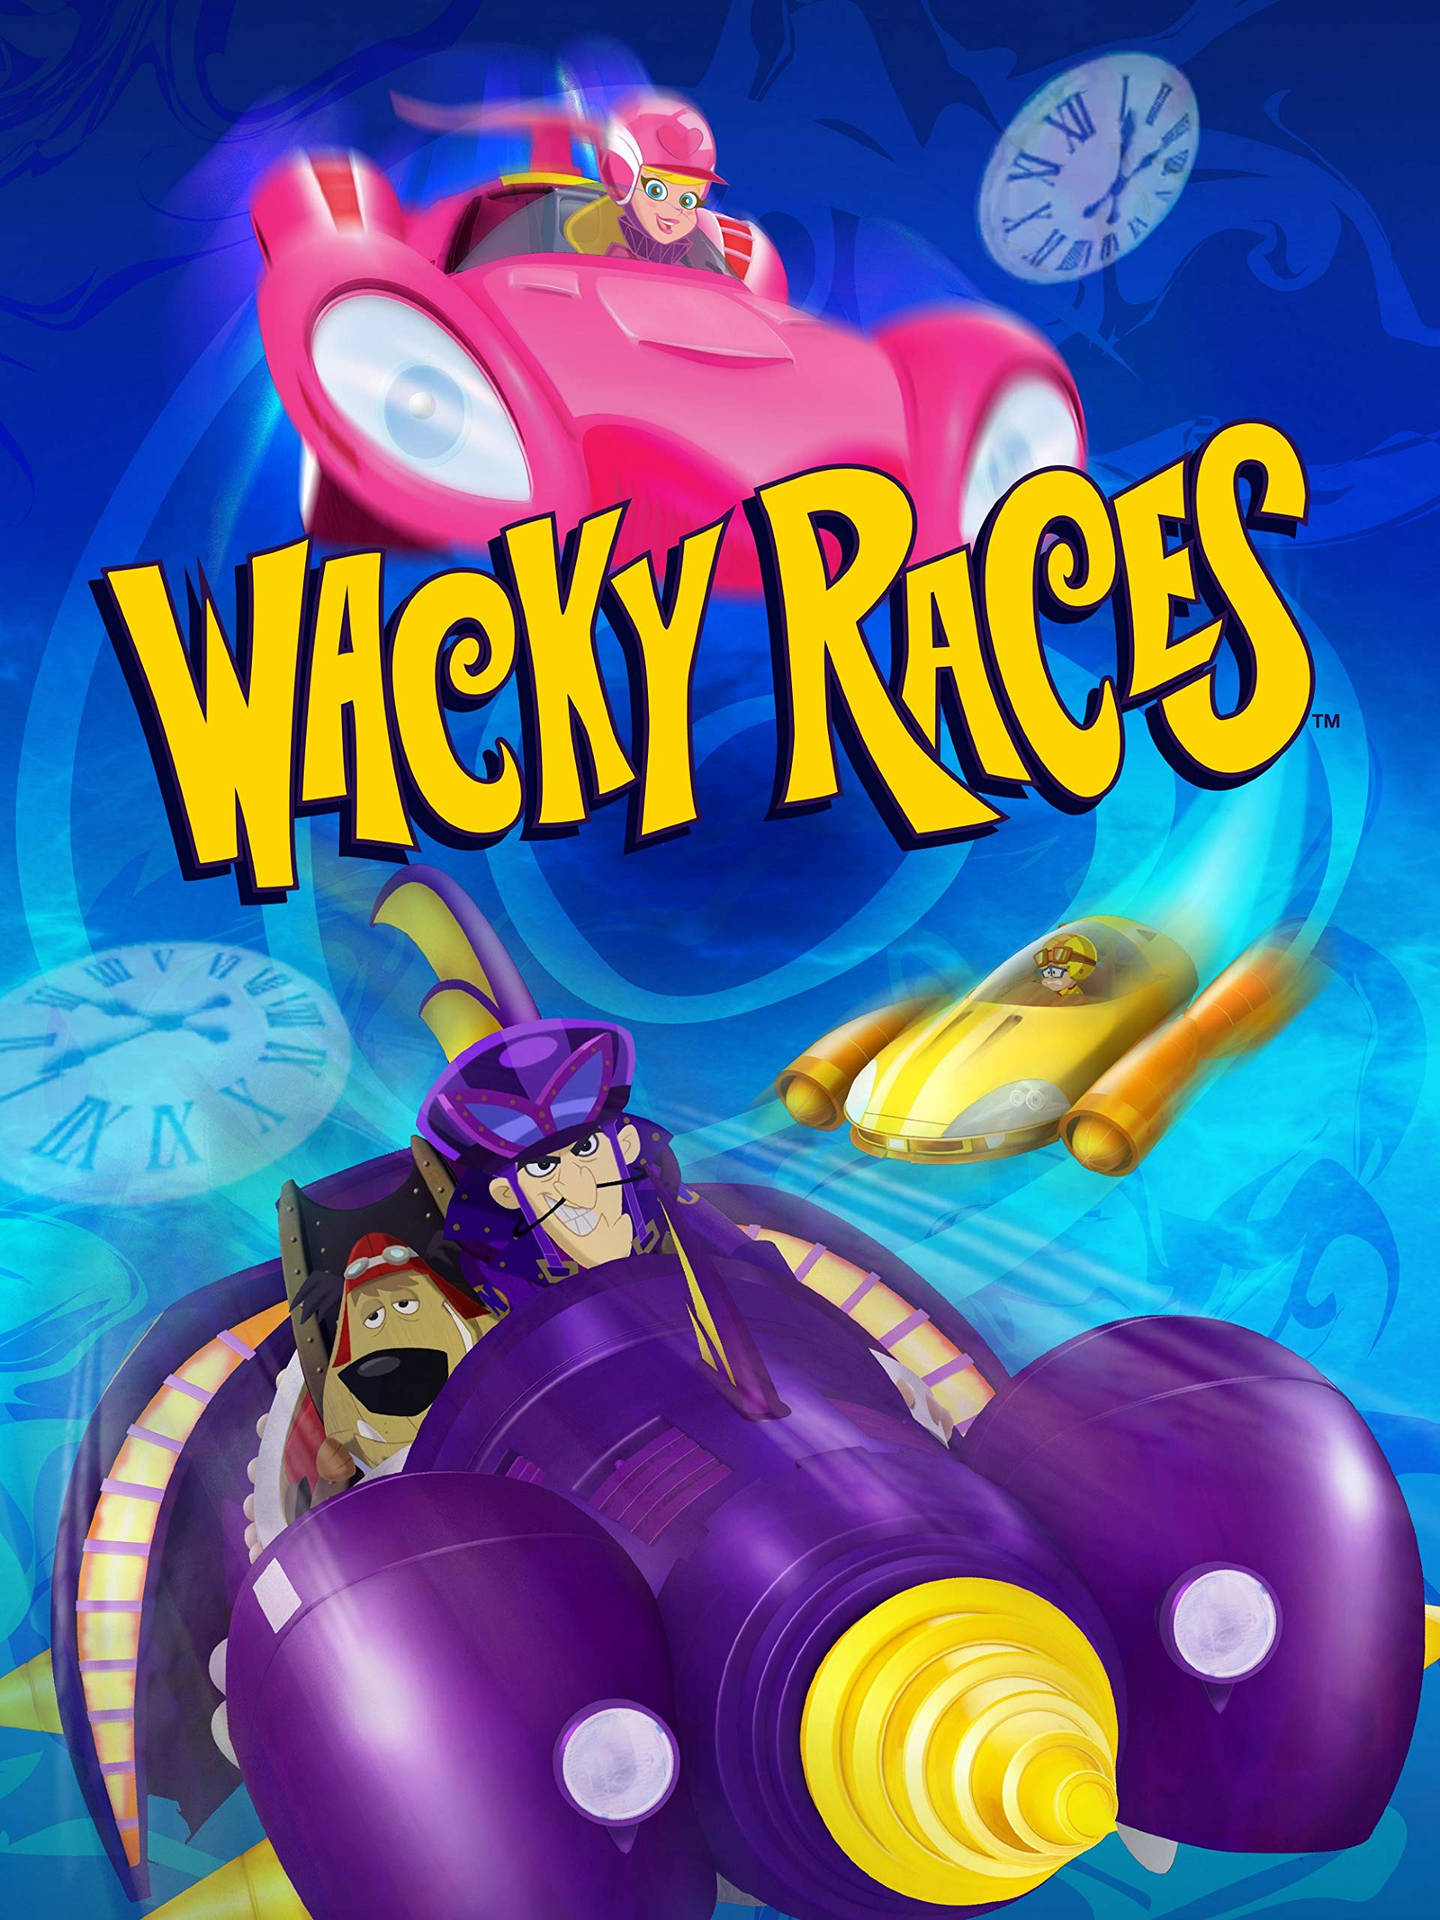 Wacky Races Promotional Poster Wallpaper